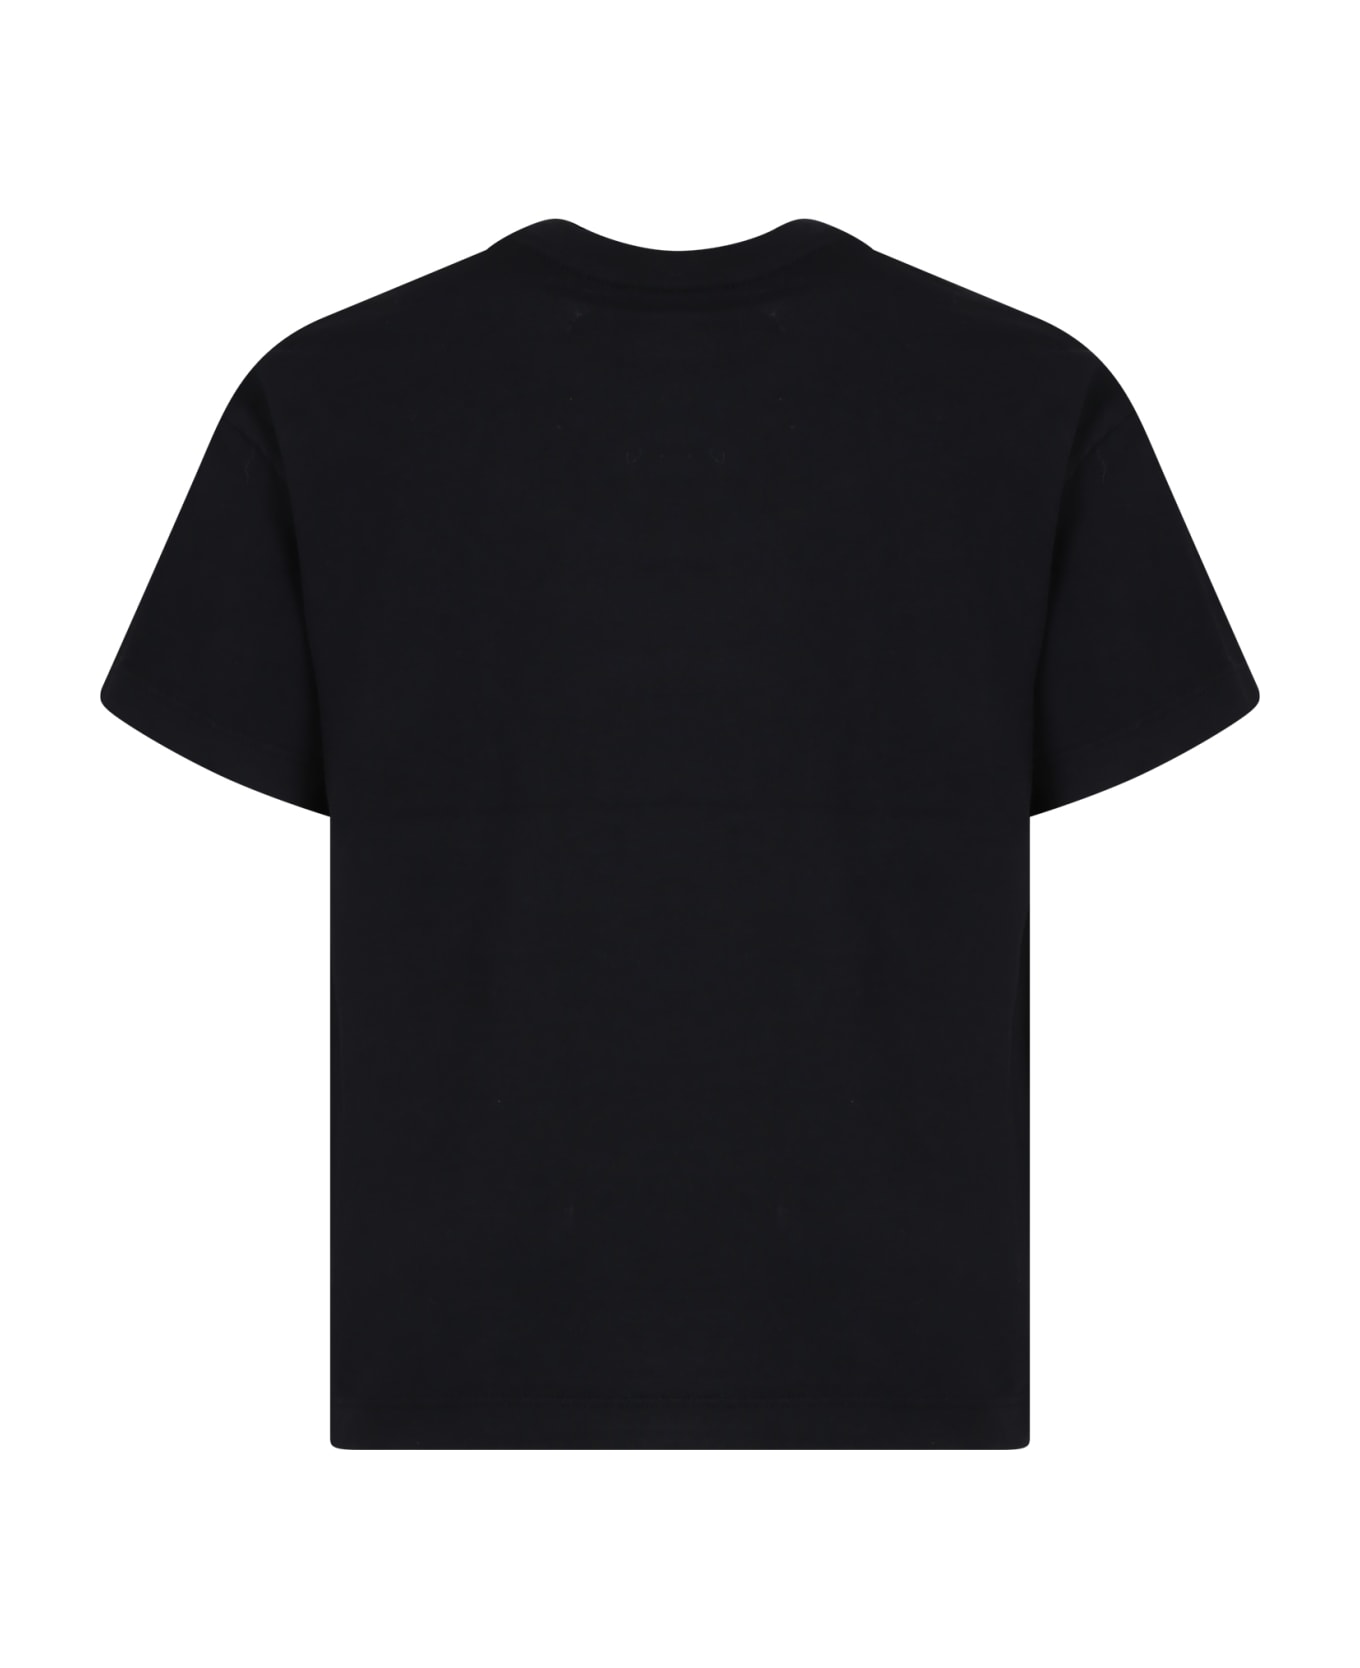 Barrow Black T-shirt For Kids With Logo - Black Tシャツ＆ポロシャツ